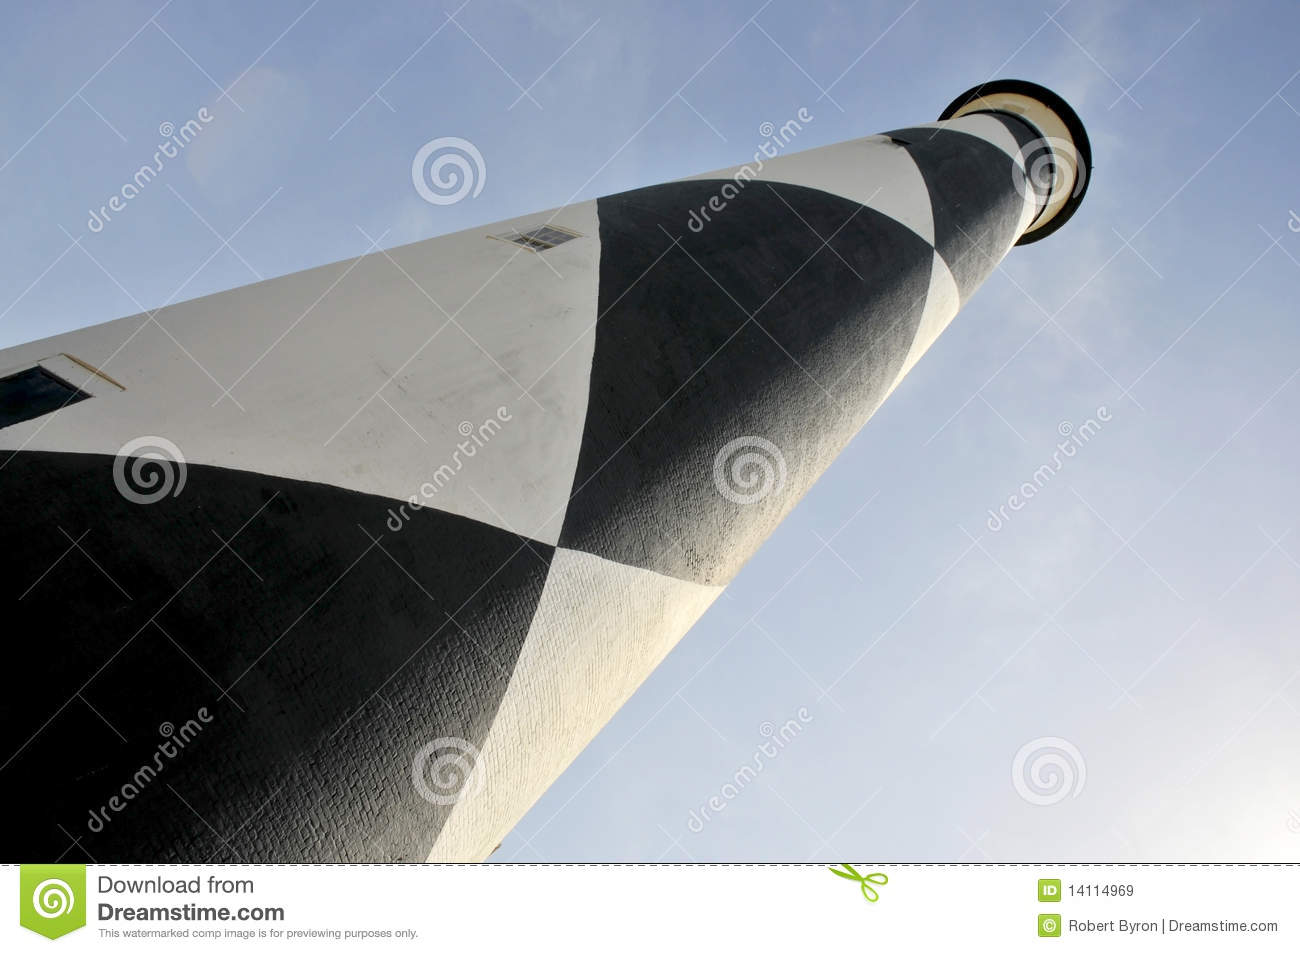 Cape Lookout Lighthouse Royalty Free Stock Images   Image  14114969